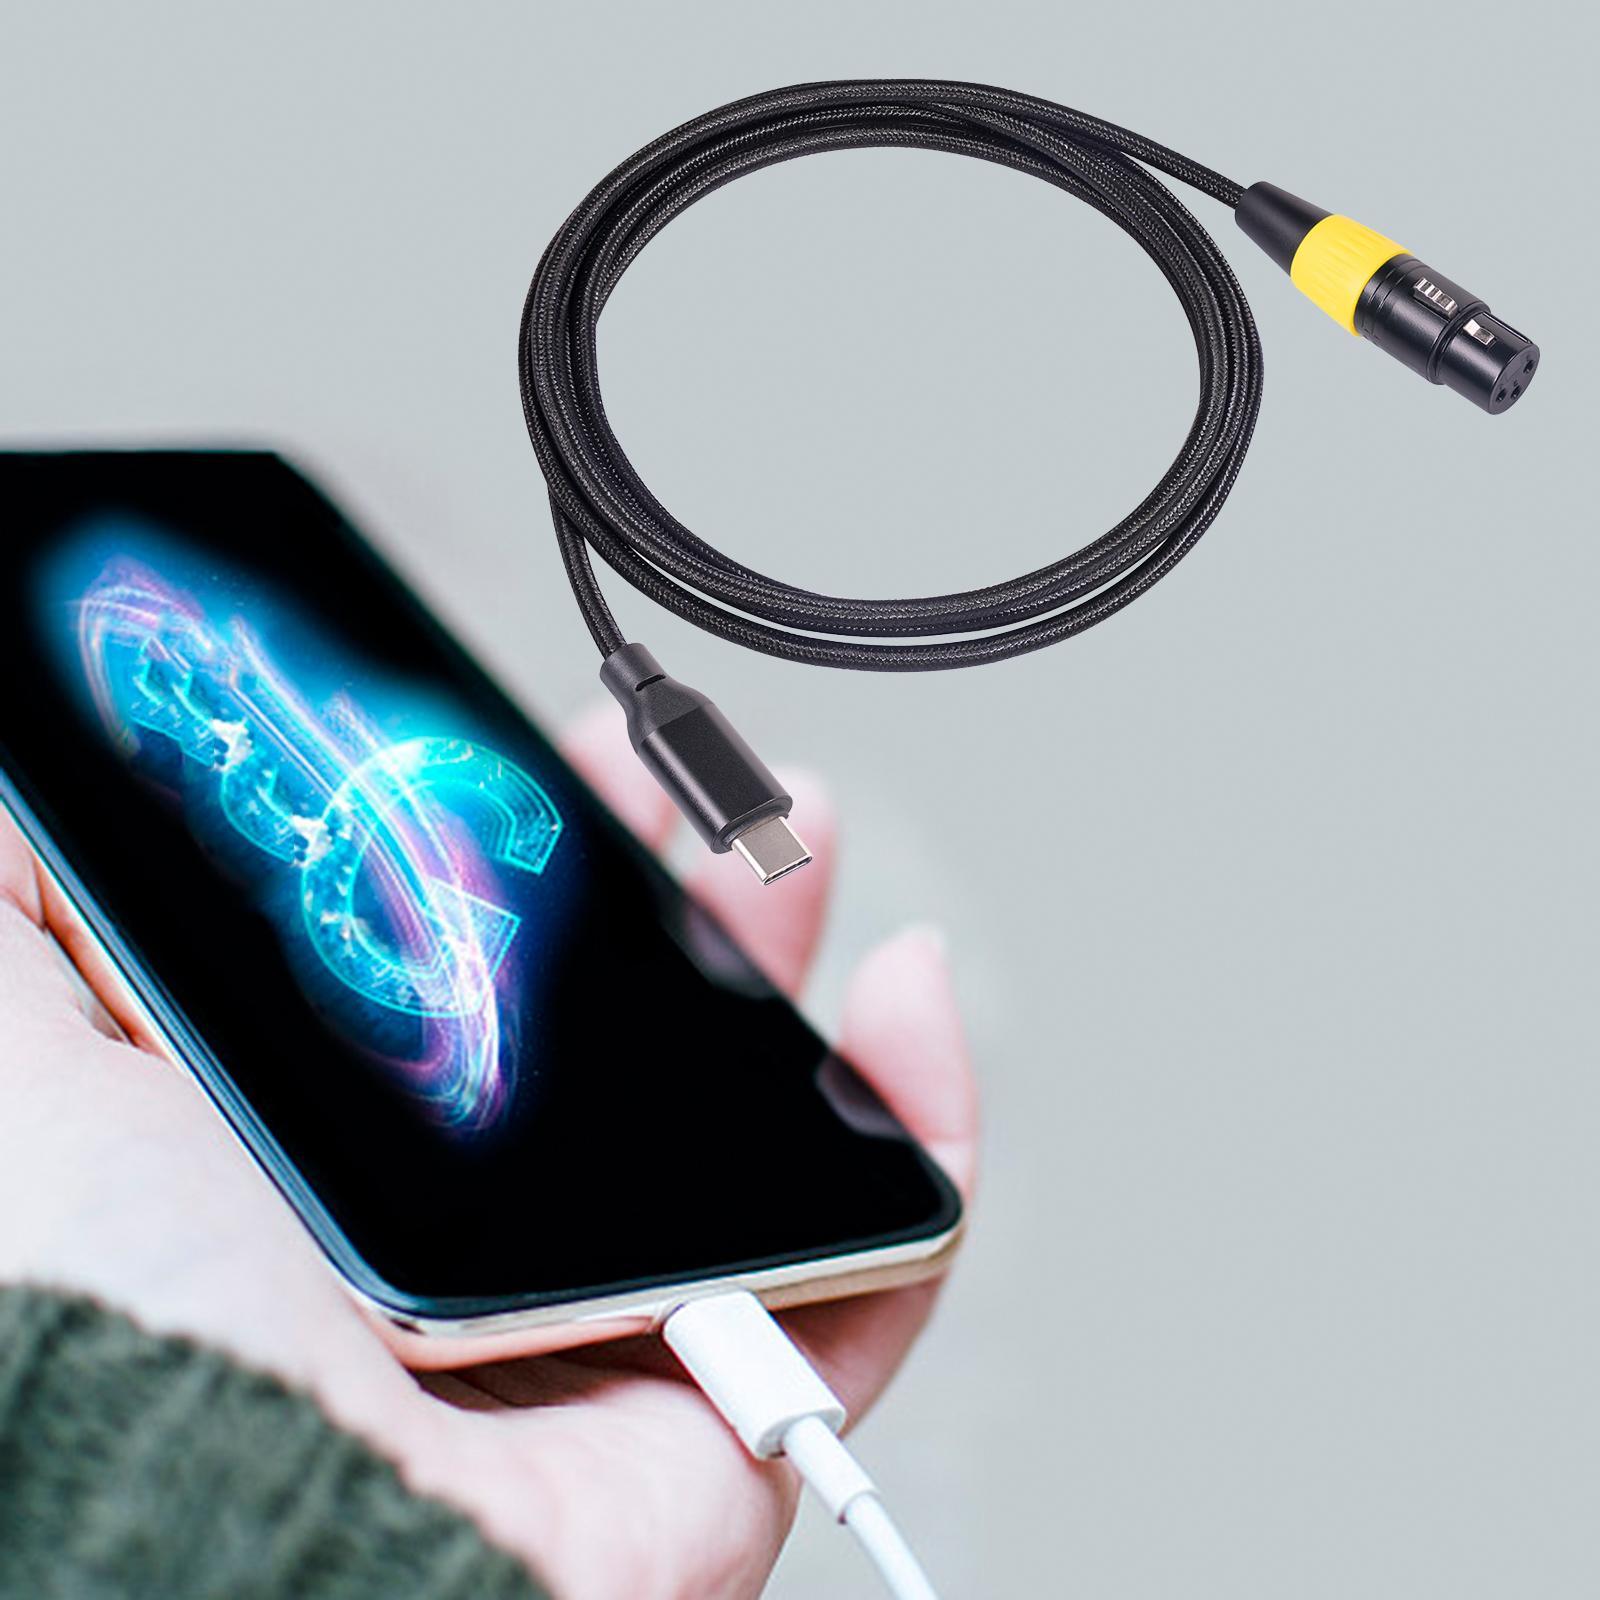 Multifunction XLR Female to USB Microphone Cable Audio Cable Male to Female for Studio